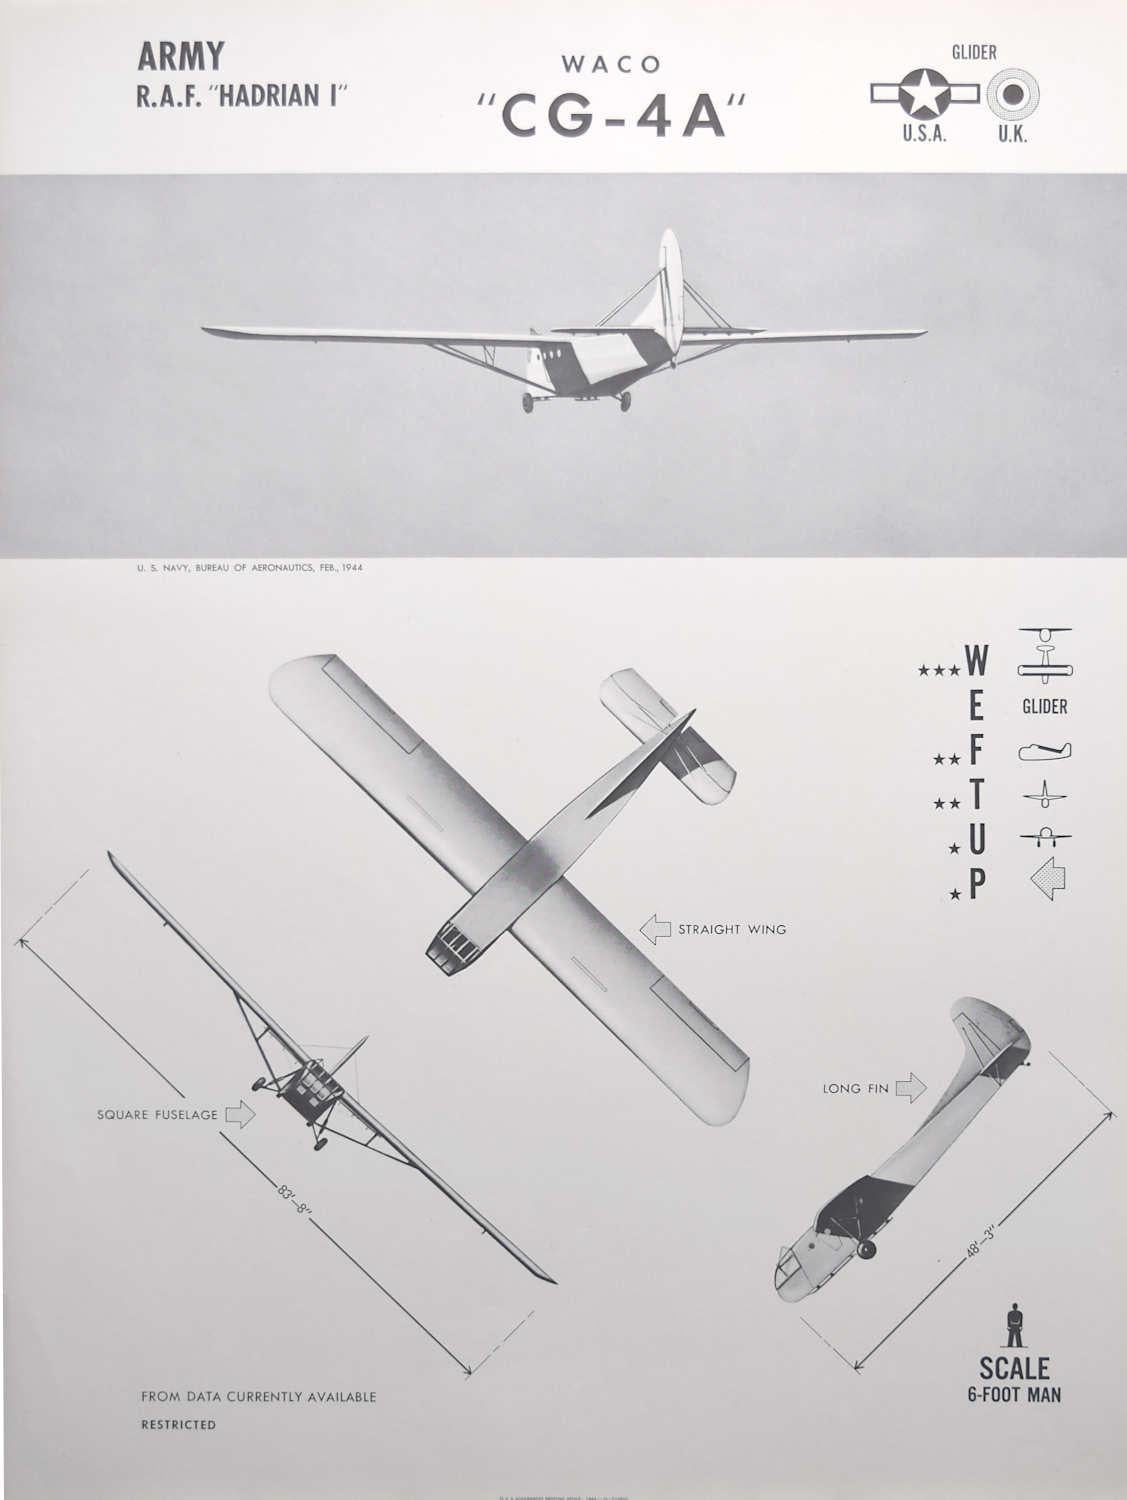 1942 Waco "CG-4A" US and UK glider plane identification poster WW2 - Print by Unknown